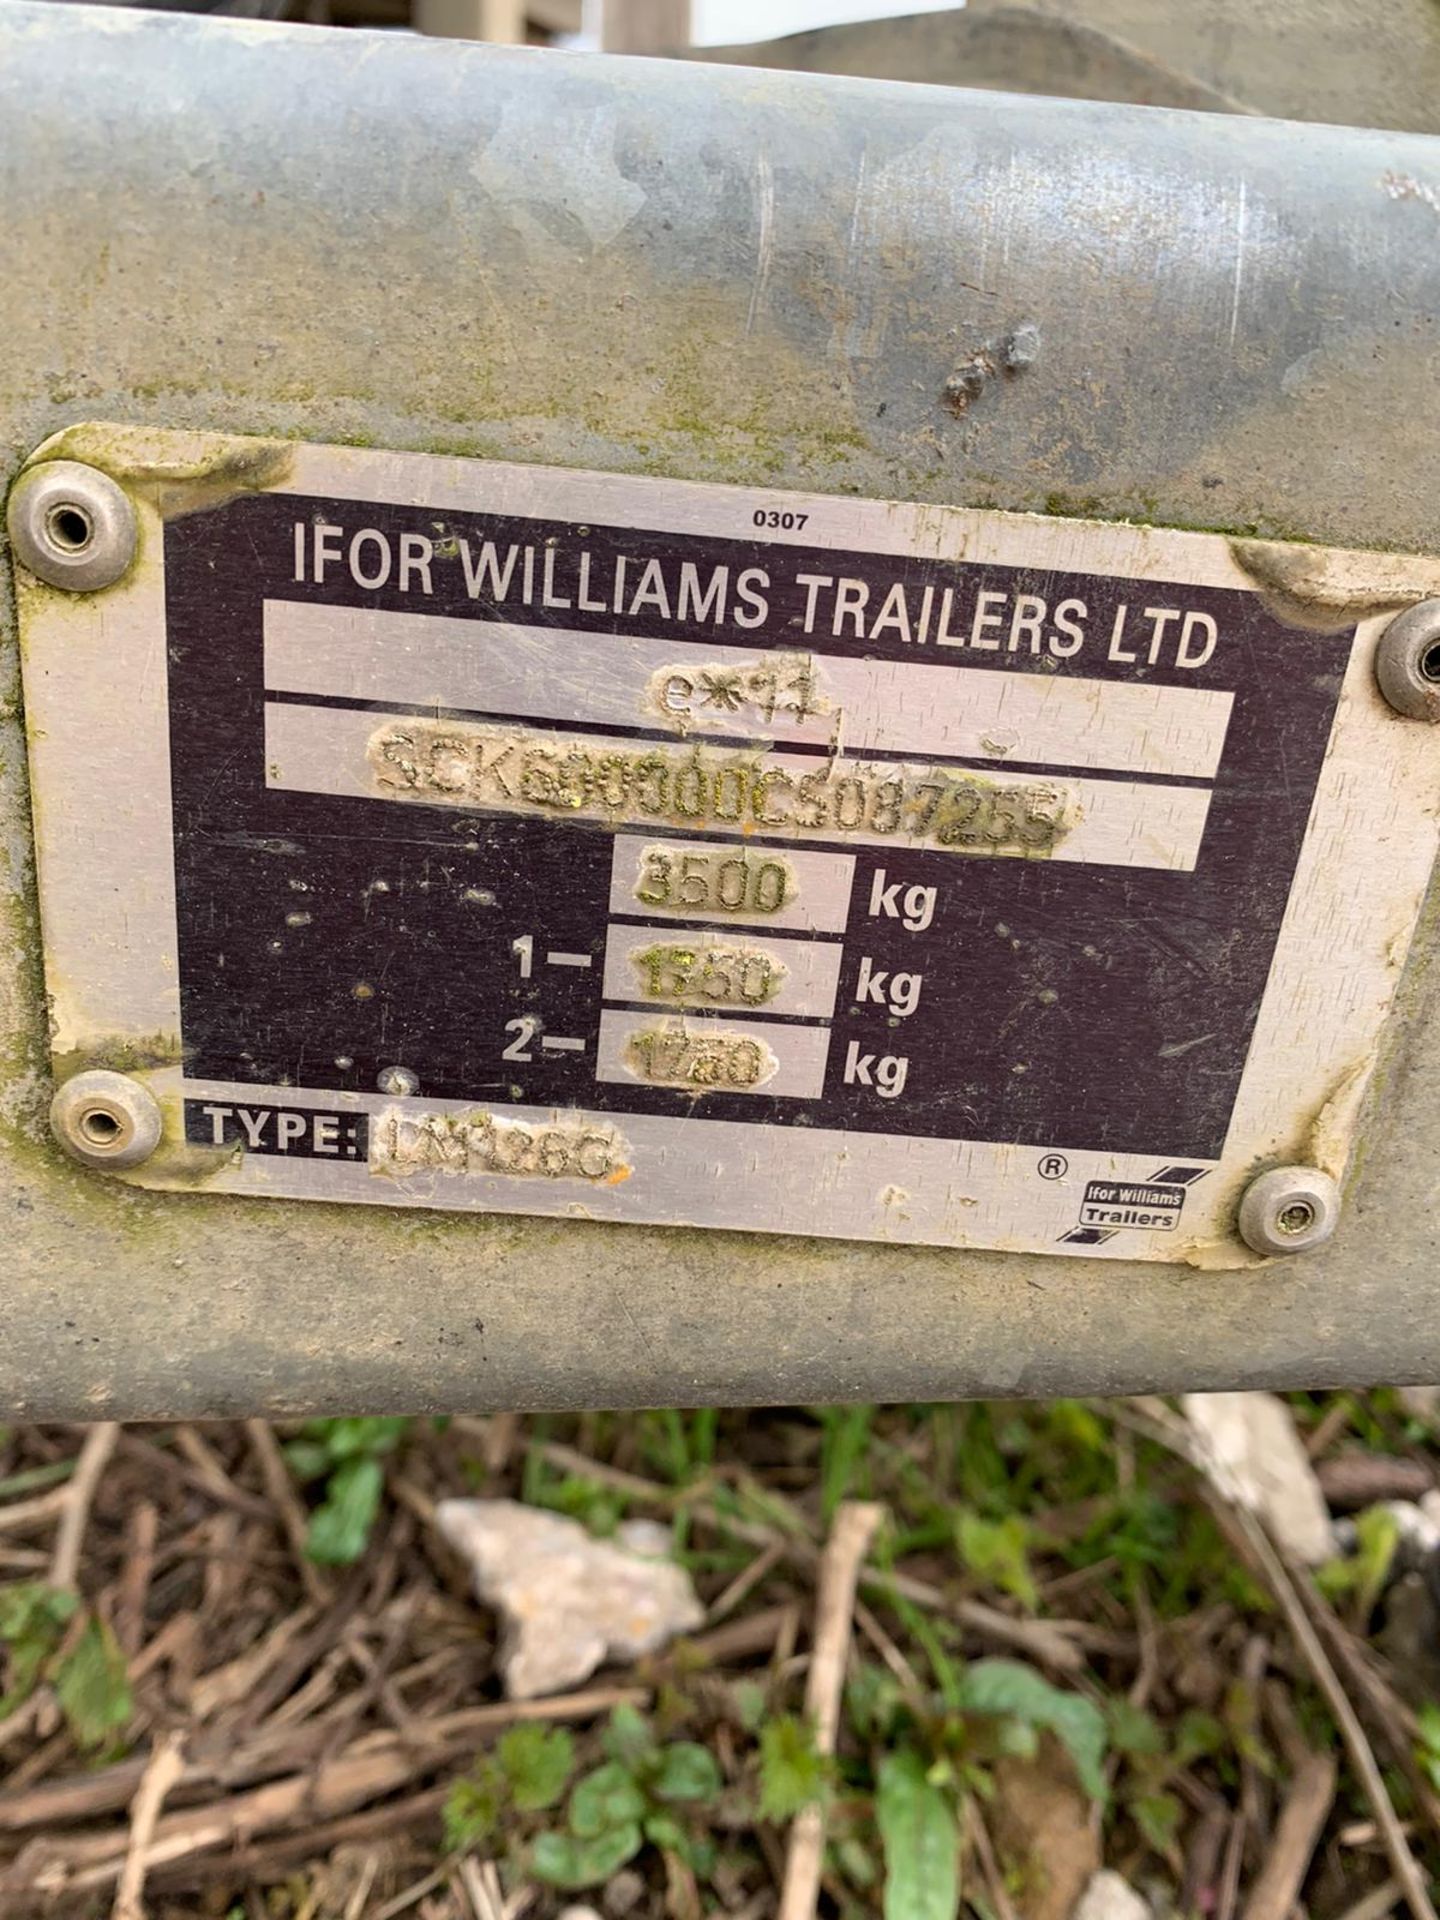 Ifor Williams LM126G 3.6m Twin Axle Commercial Trailer c/w Drop Sides - Image 5 of 5